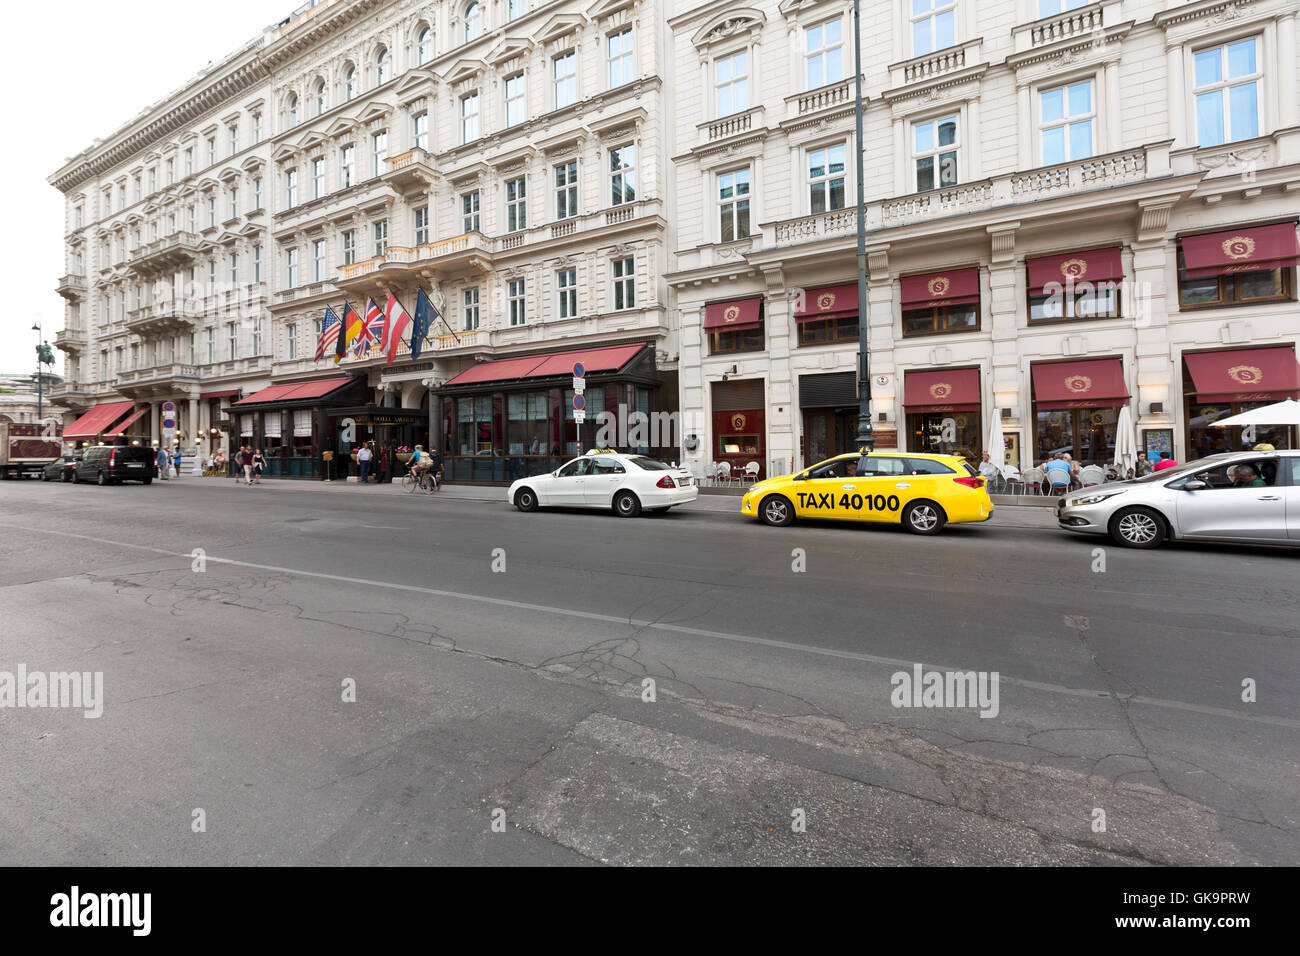 Viennese walking in the street Graben (Grabenstrasse), the main street of the old town of Vienna, Stock Photo